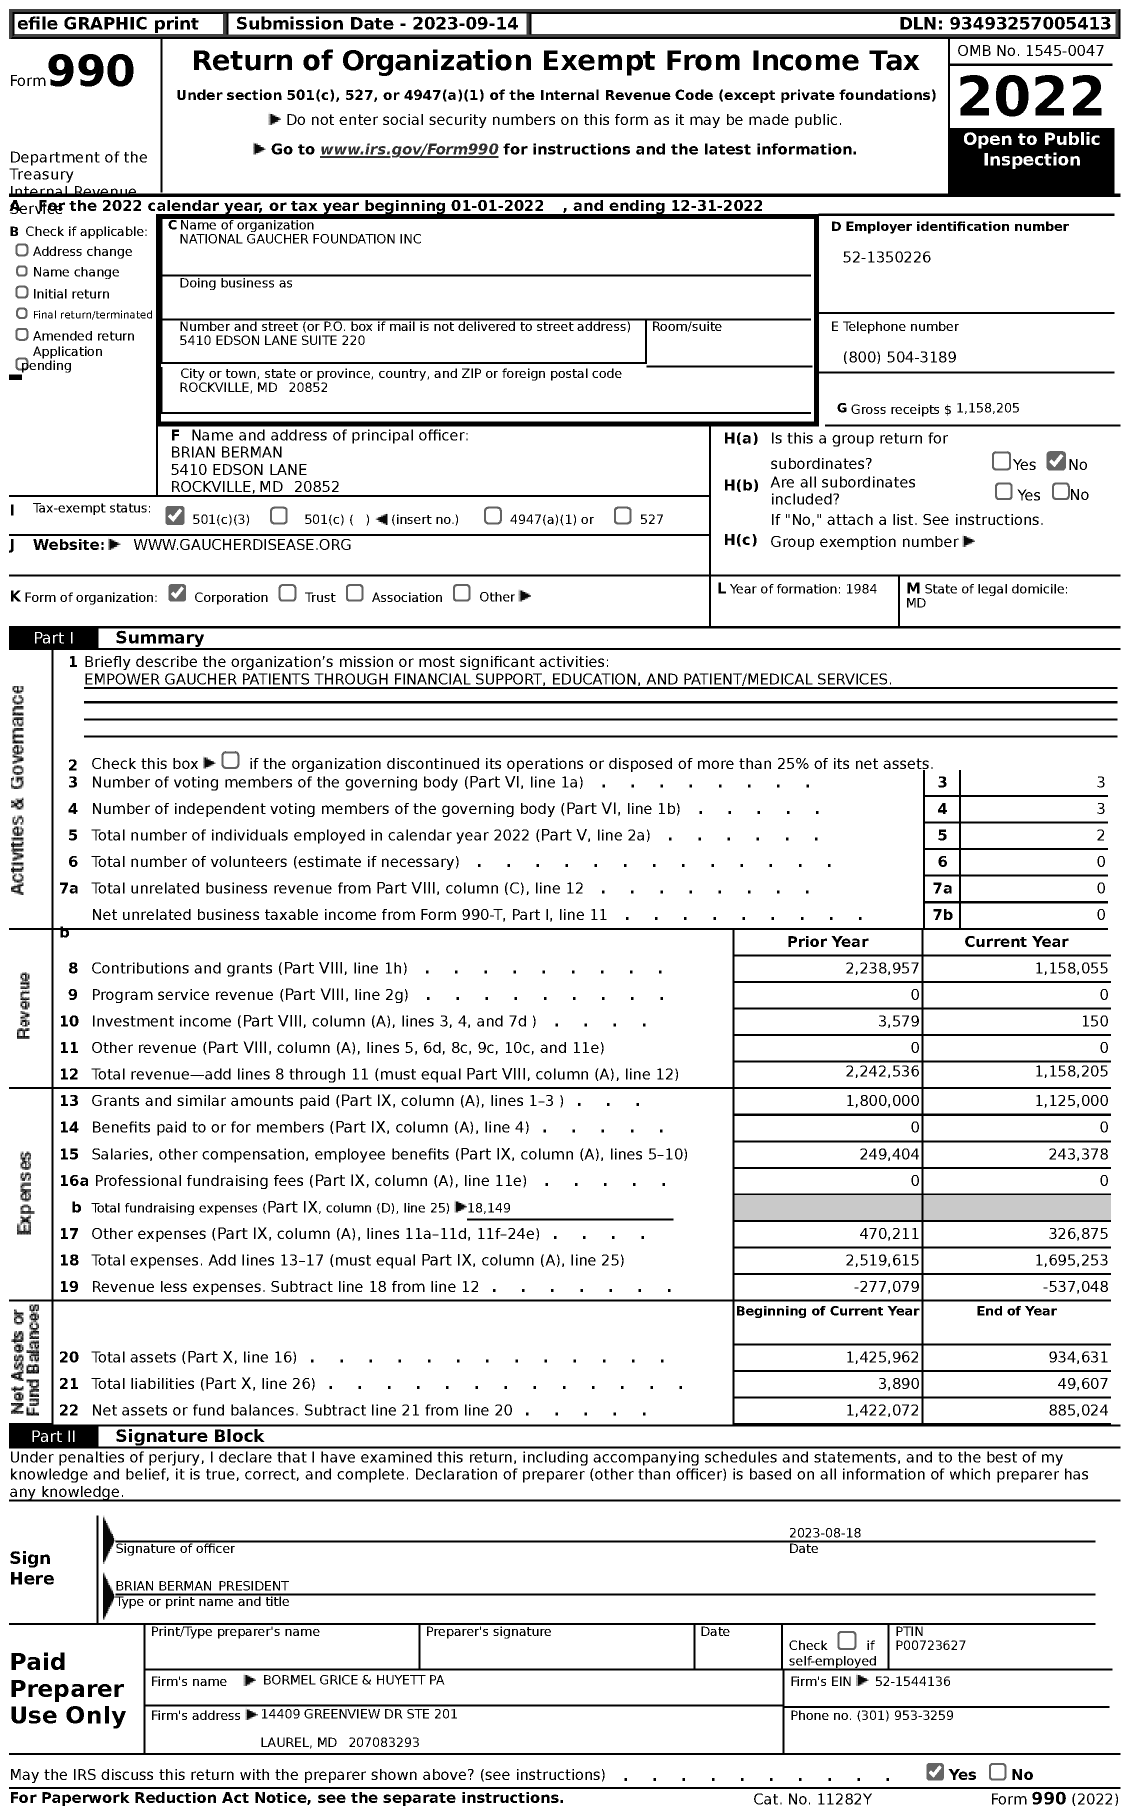 Image of first page of 2022 Form 990 for National Gaucher Foundation (NGF)